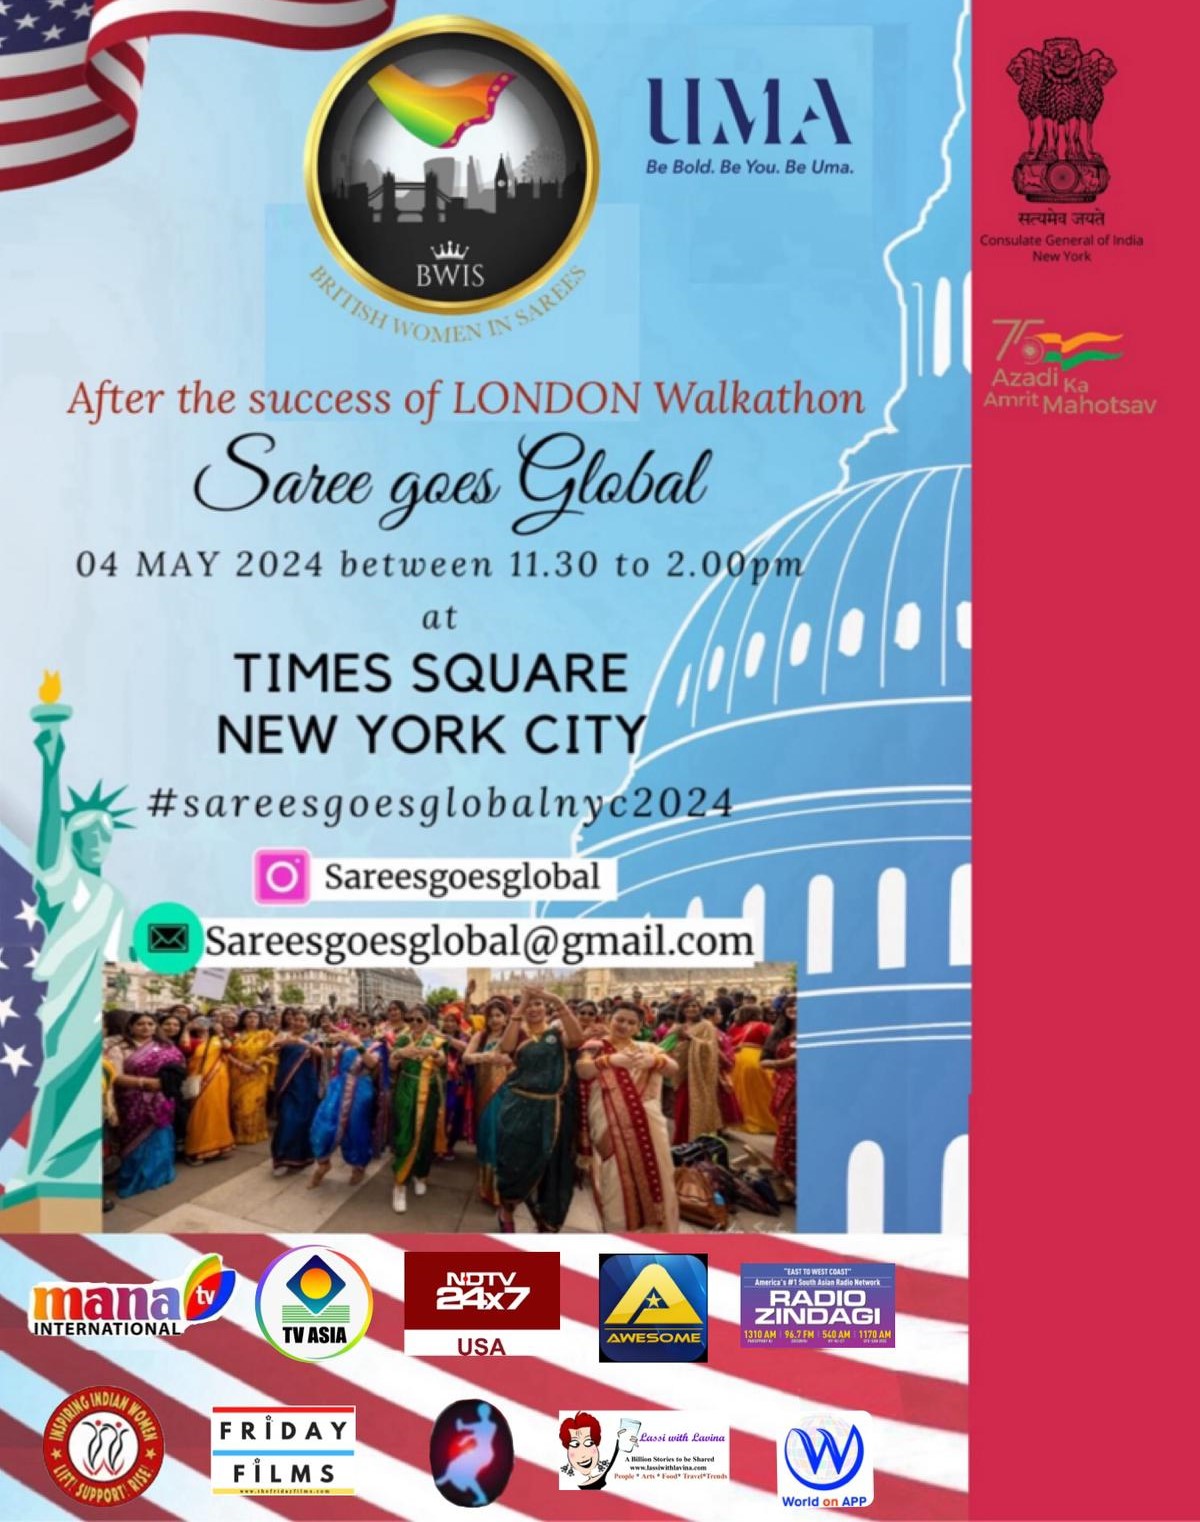 Sarees Go Global in Times Square